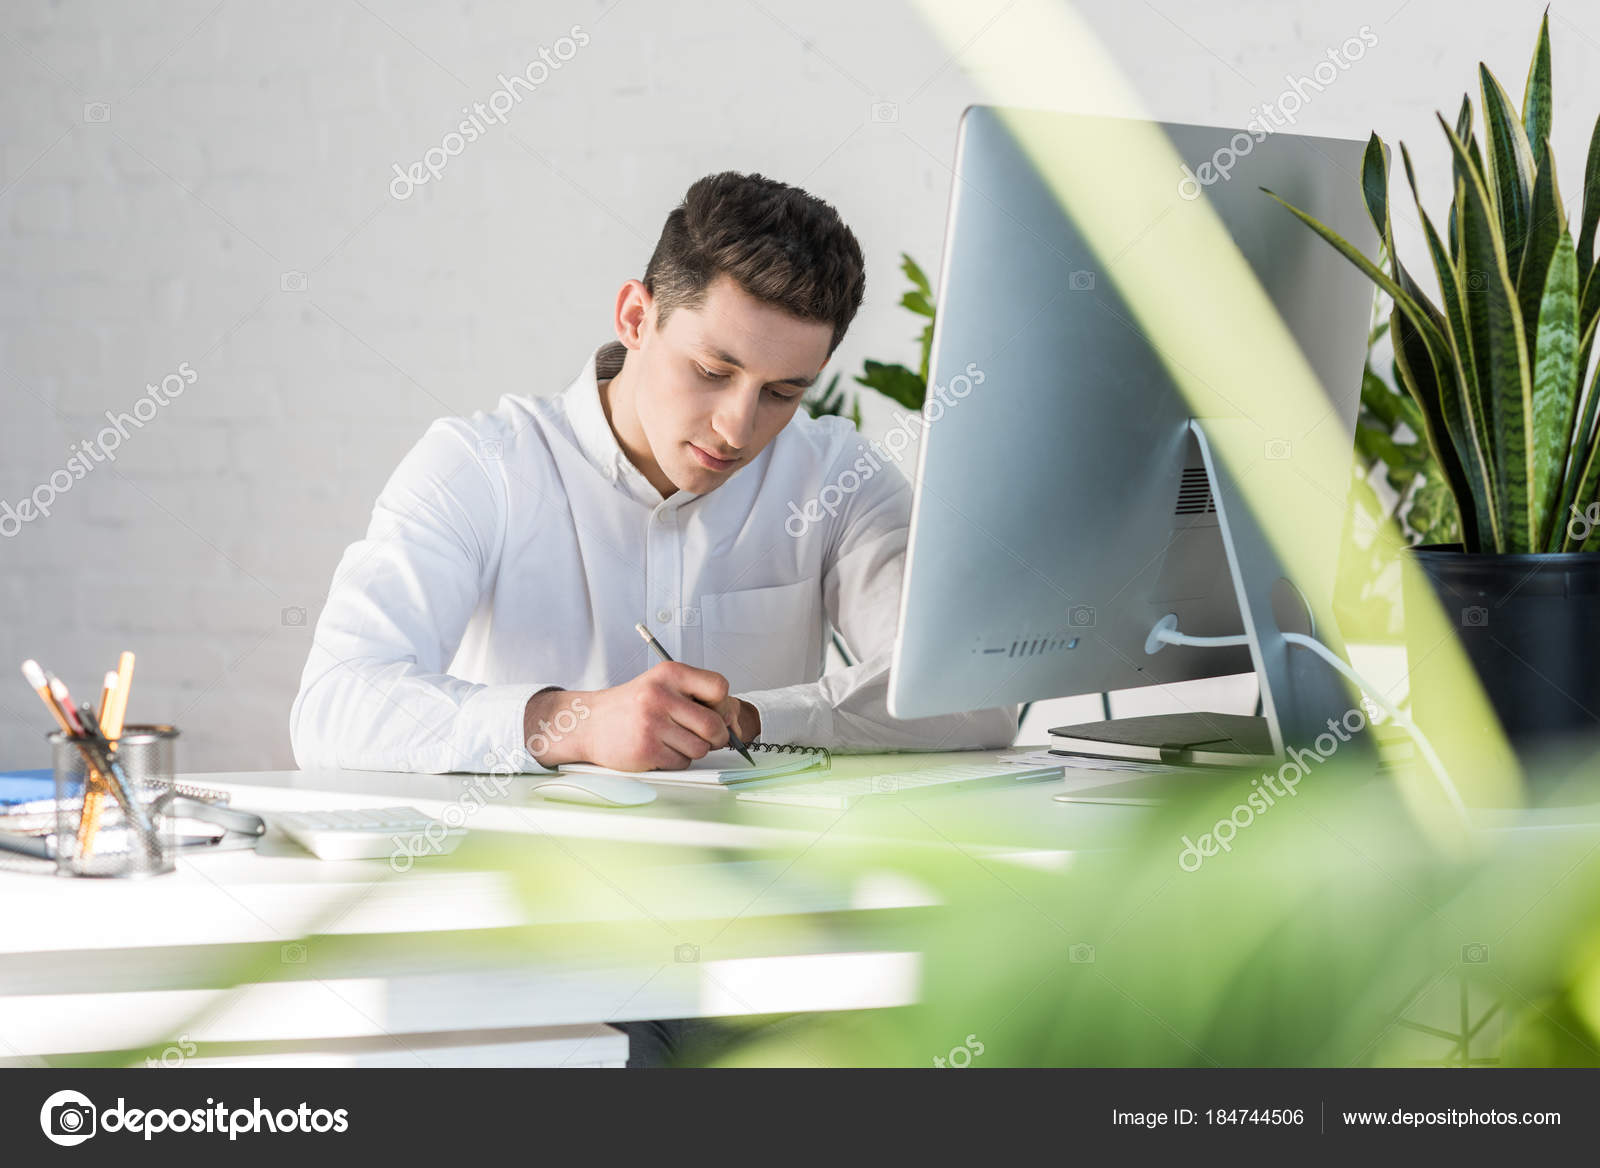 Focused young businessman writing notes at workplace